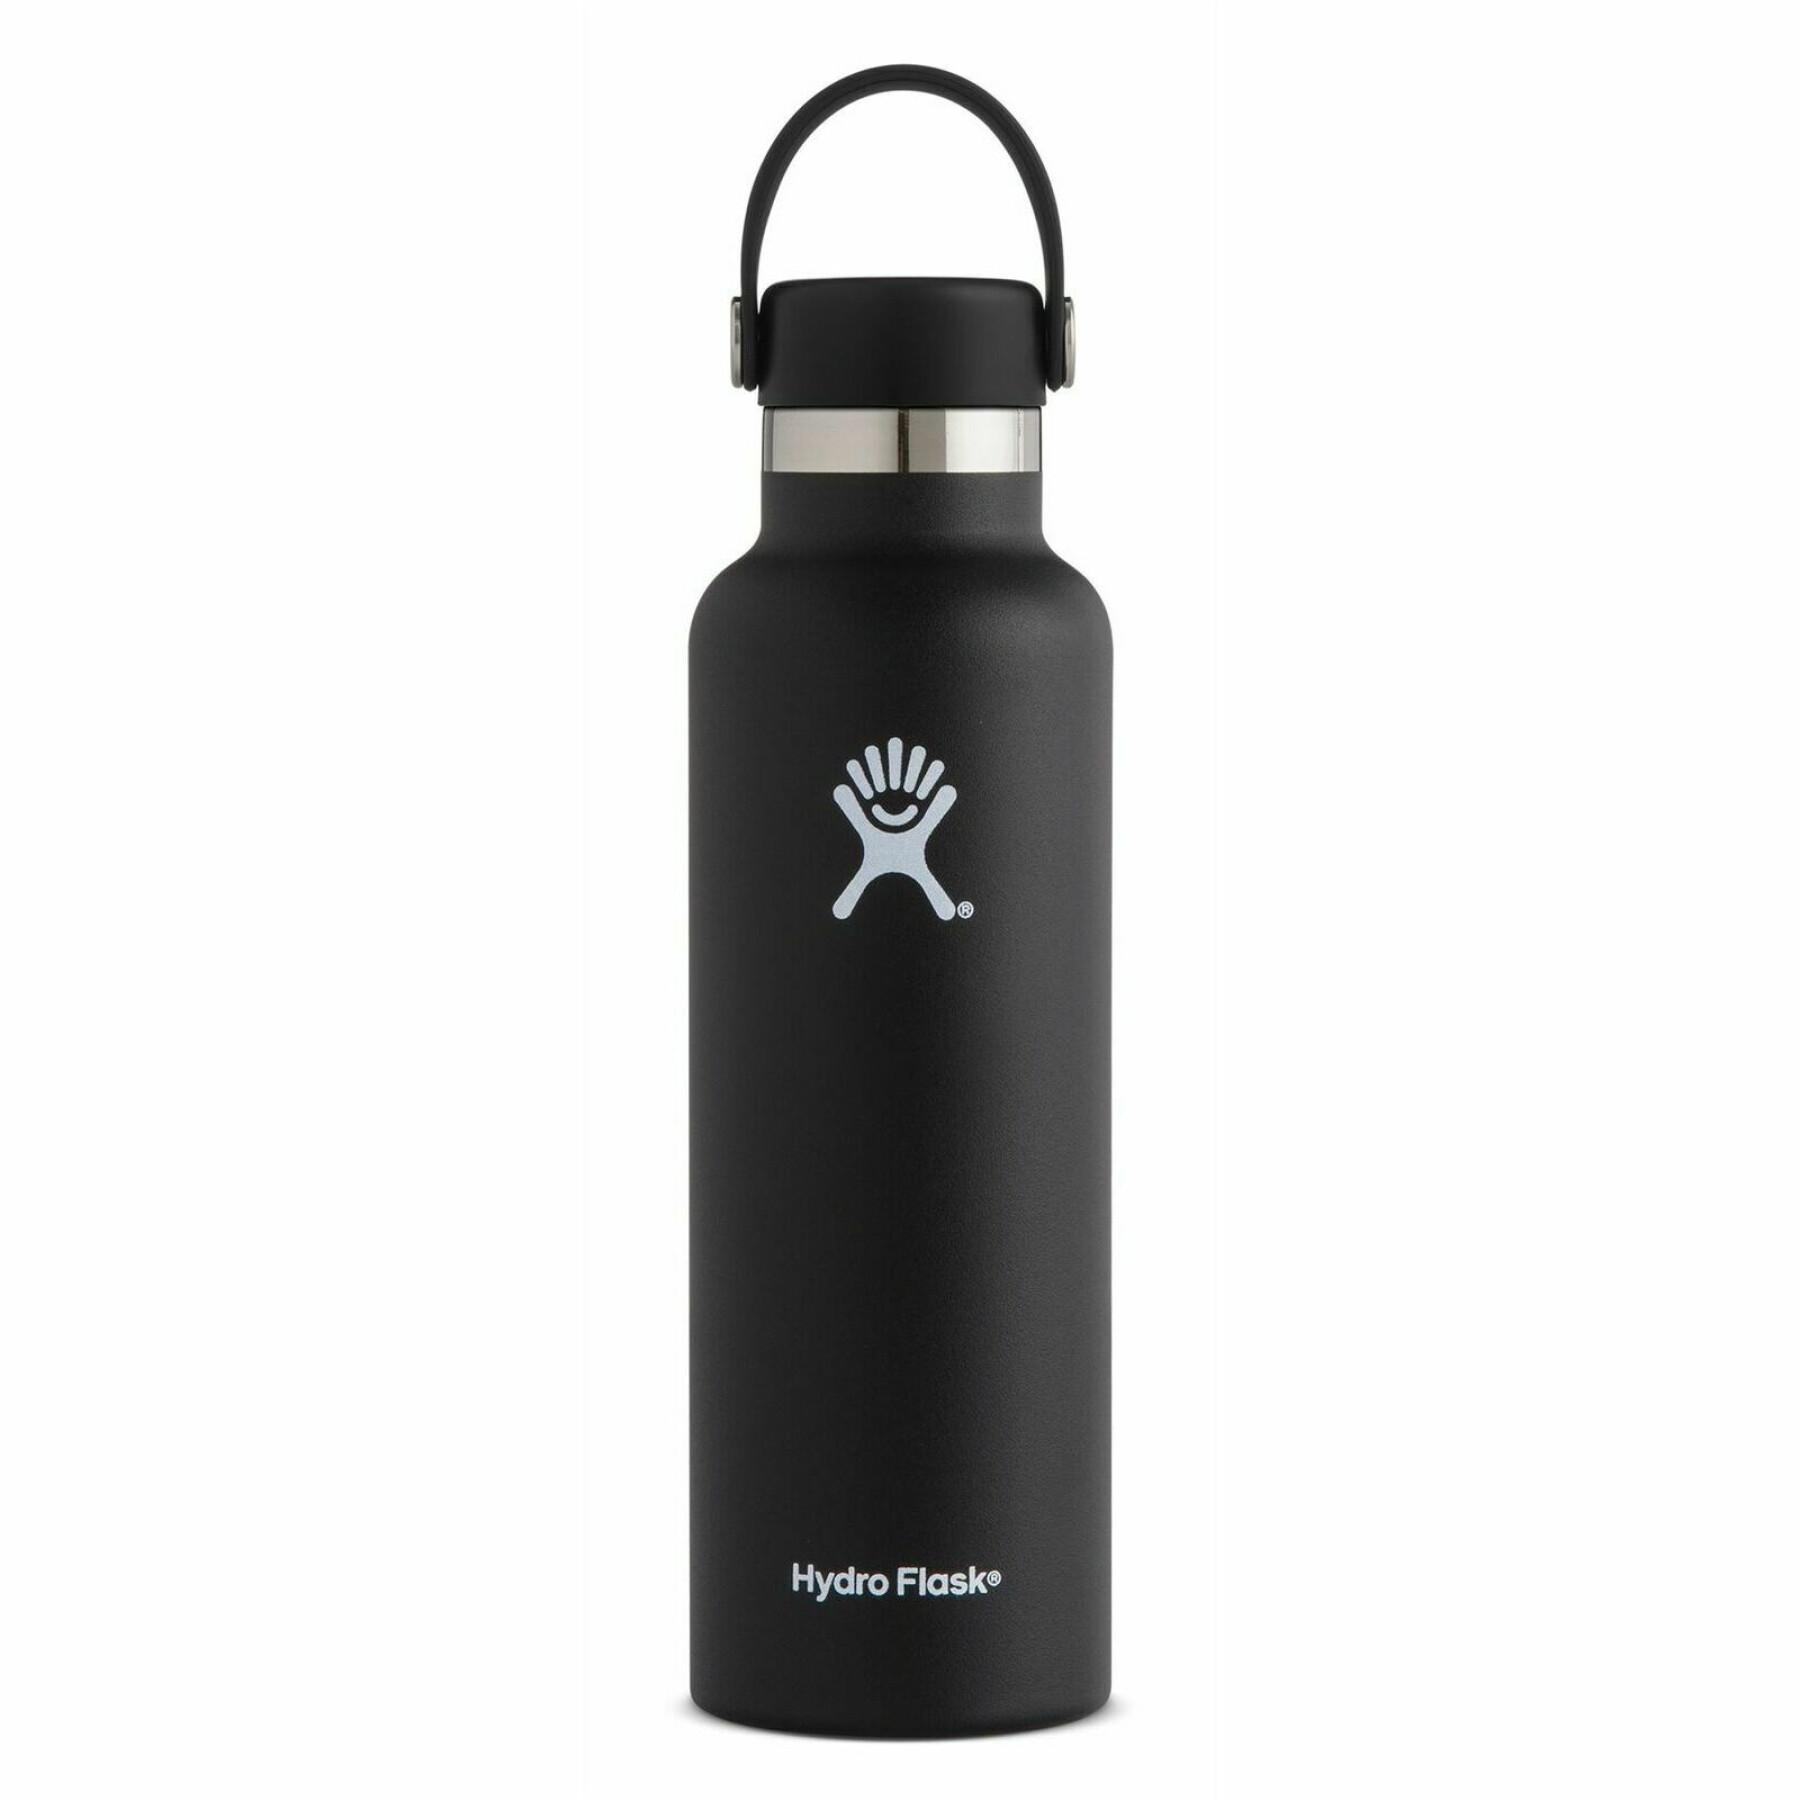 Standaardfles Hydro Flask mouth with stainless steel cap 21 oz